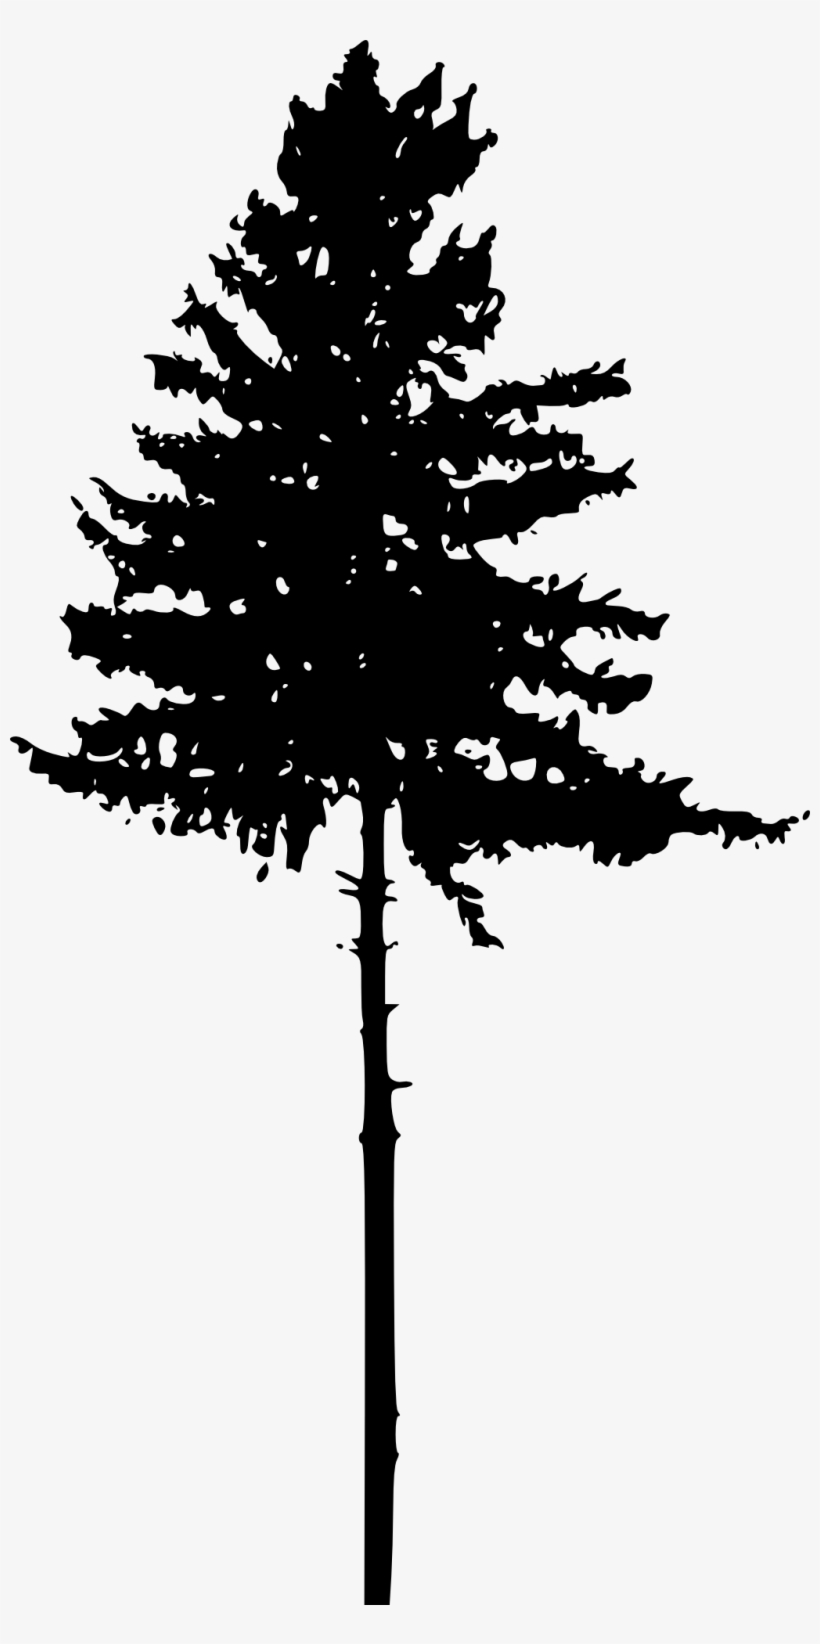 Free Download - Tree Silhouette Png, transparent png #133095